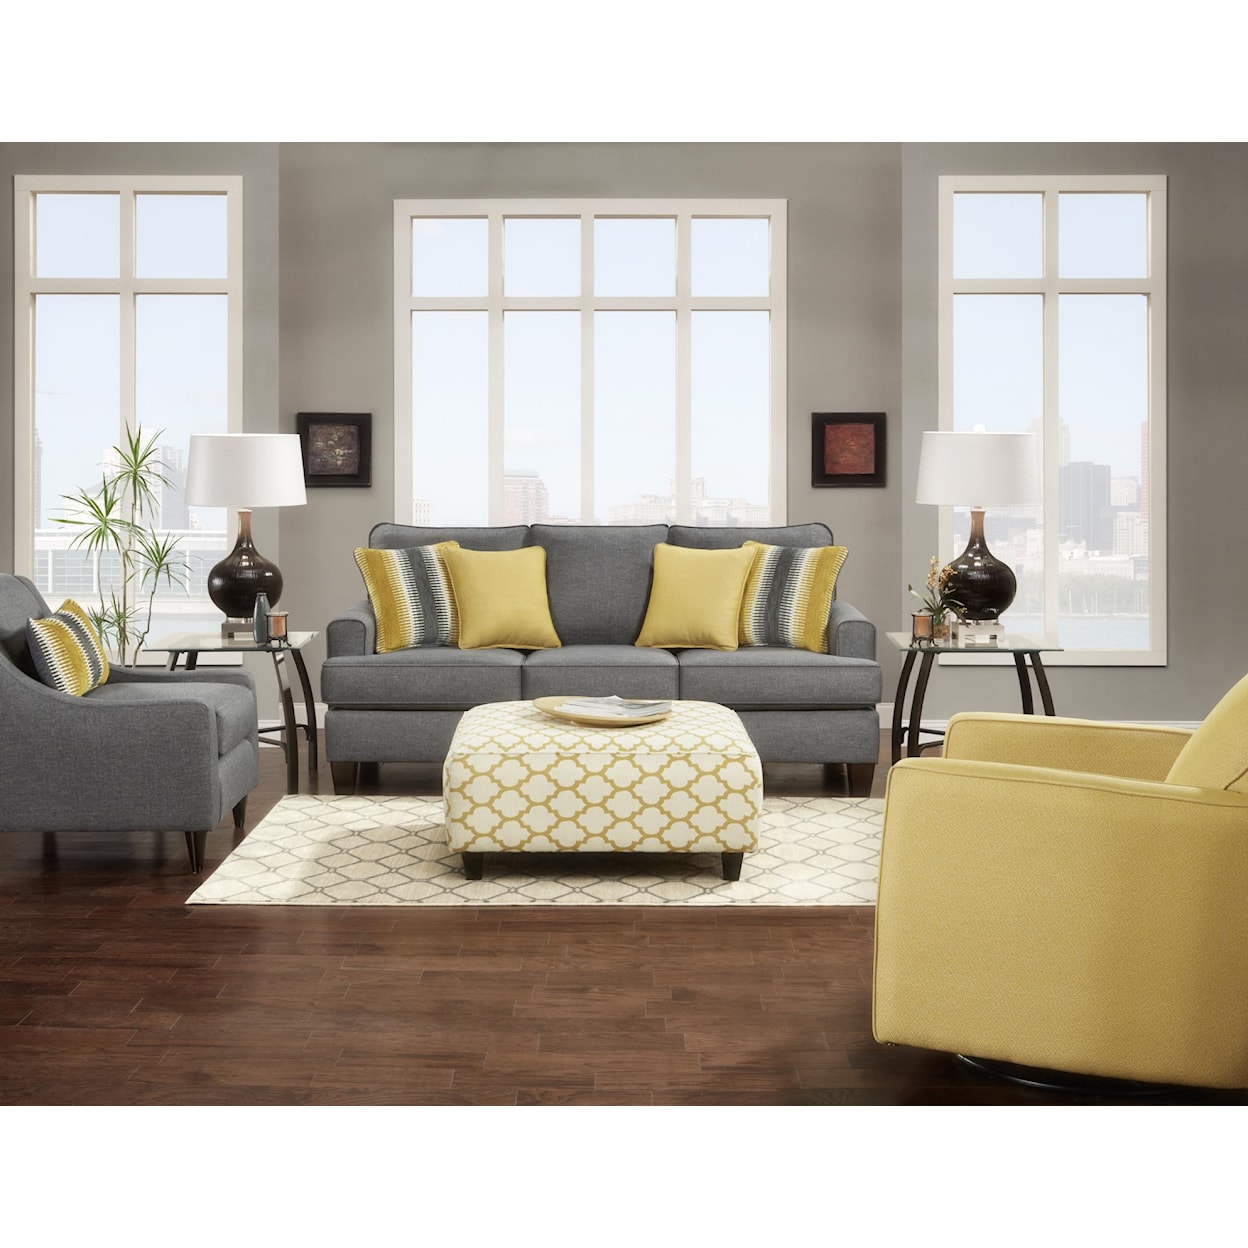 Fusion Furniture 2600 Maxwell Gray Stationary Living Room Group